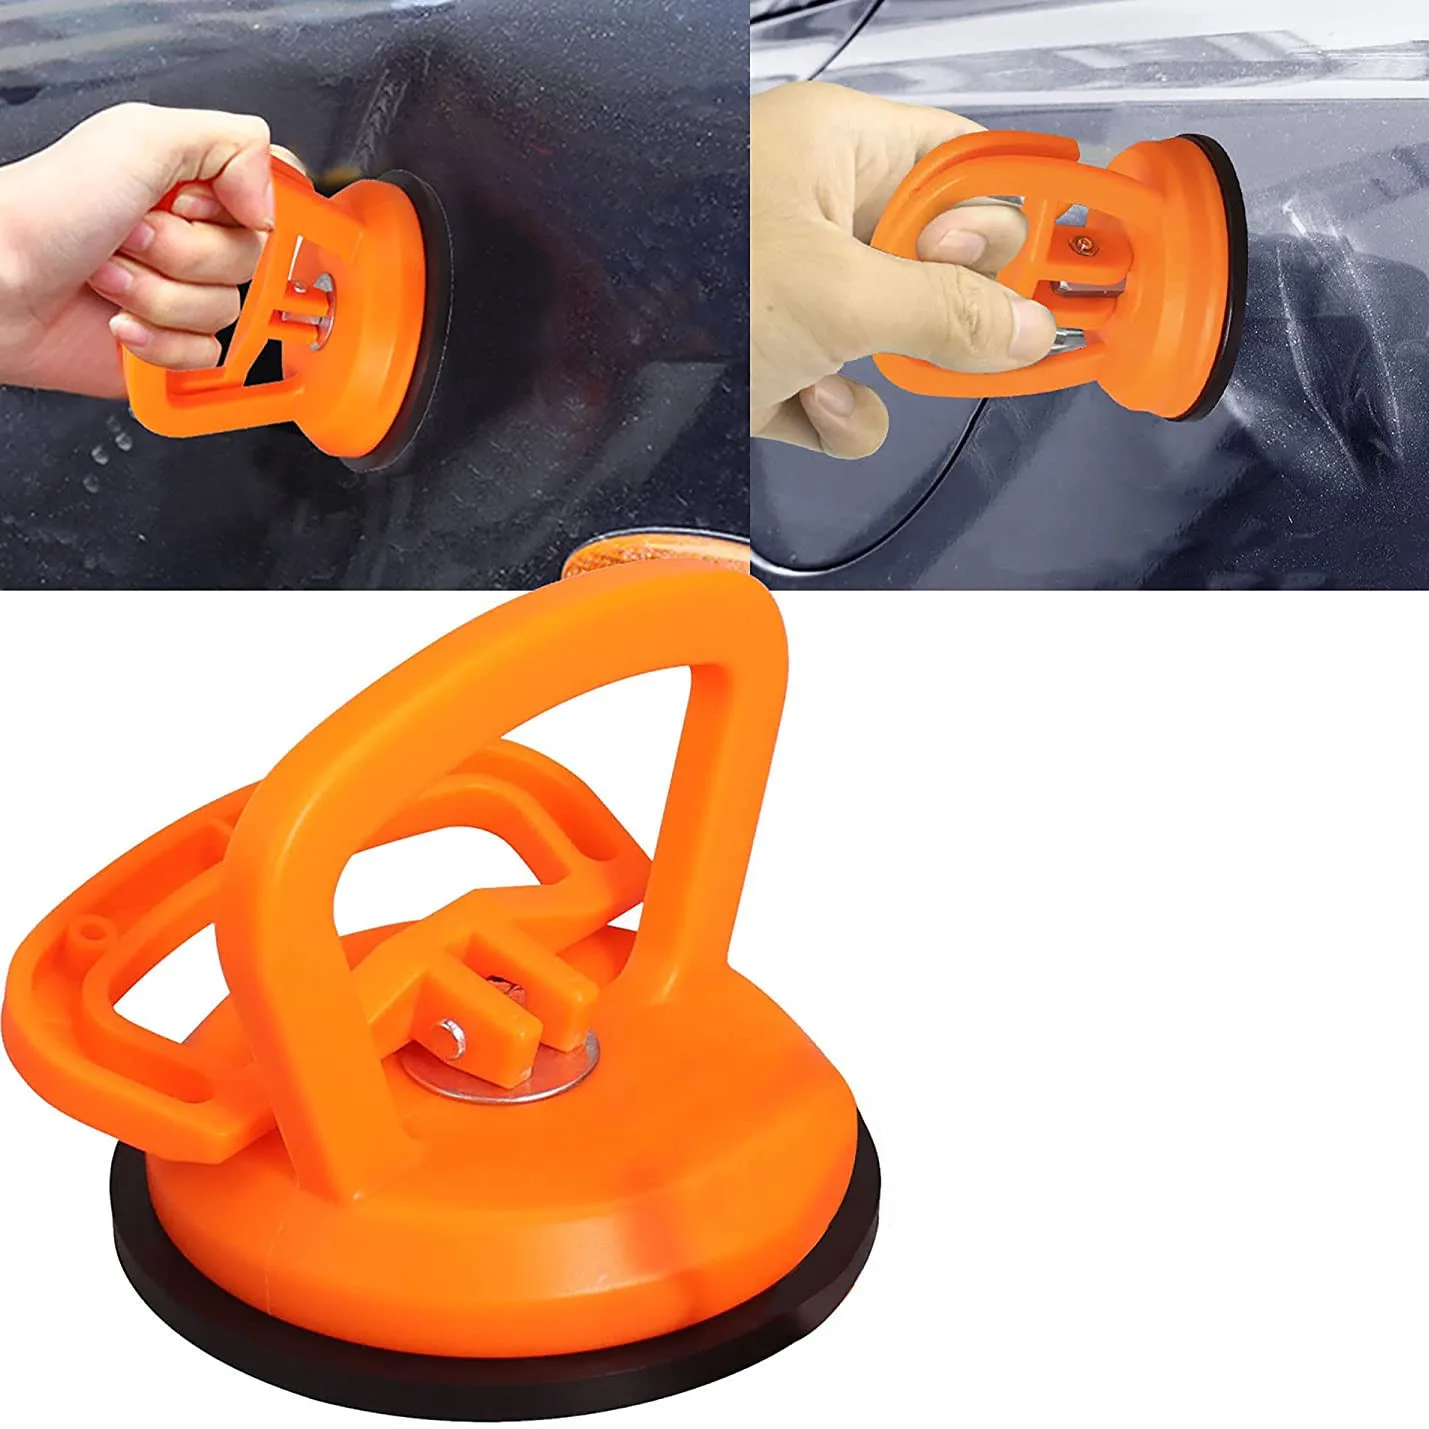 

Car Tools Pull Out Car Dents 2 inch Dent Puller Pull Bodywork Panel Remover Sucker Asuction cup Suitable for Small Dents